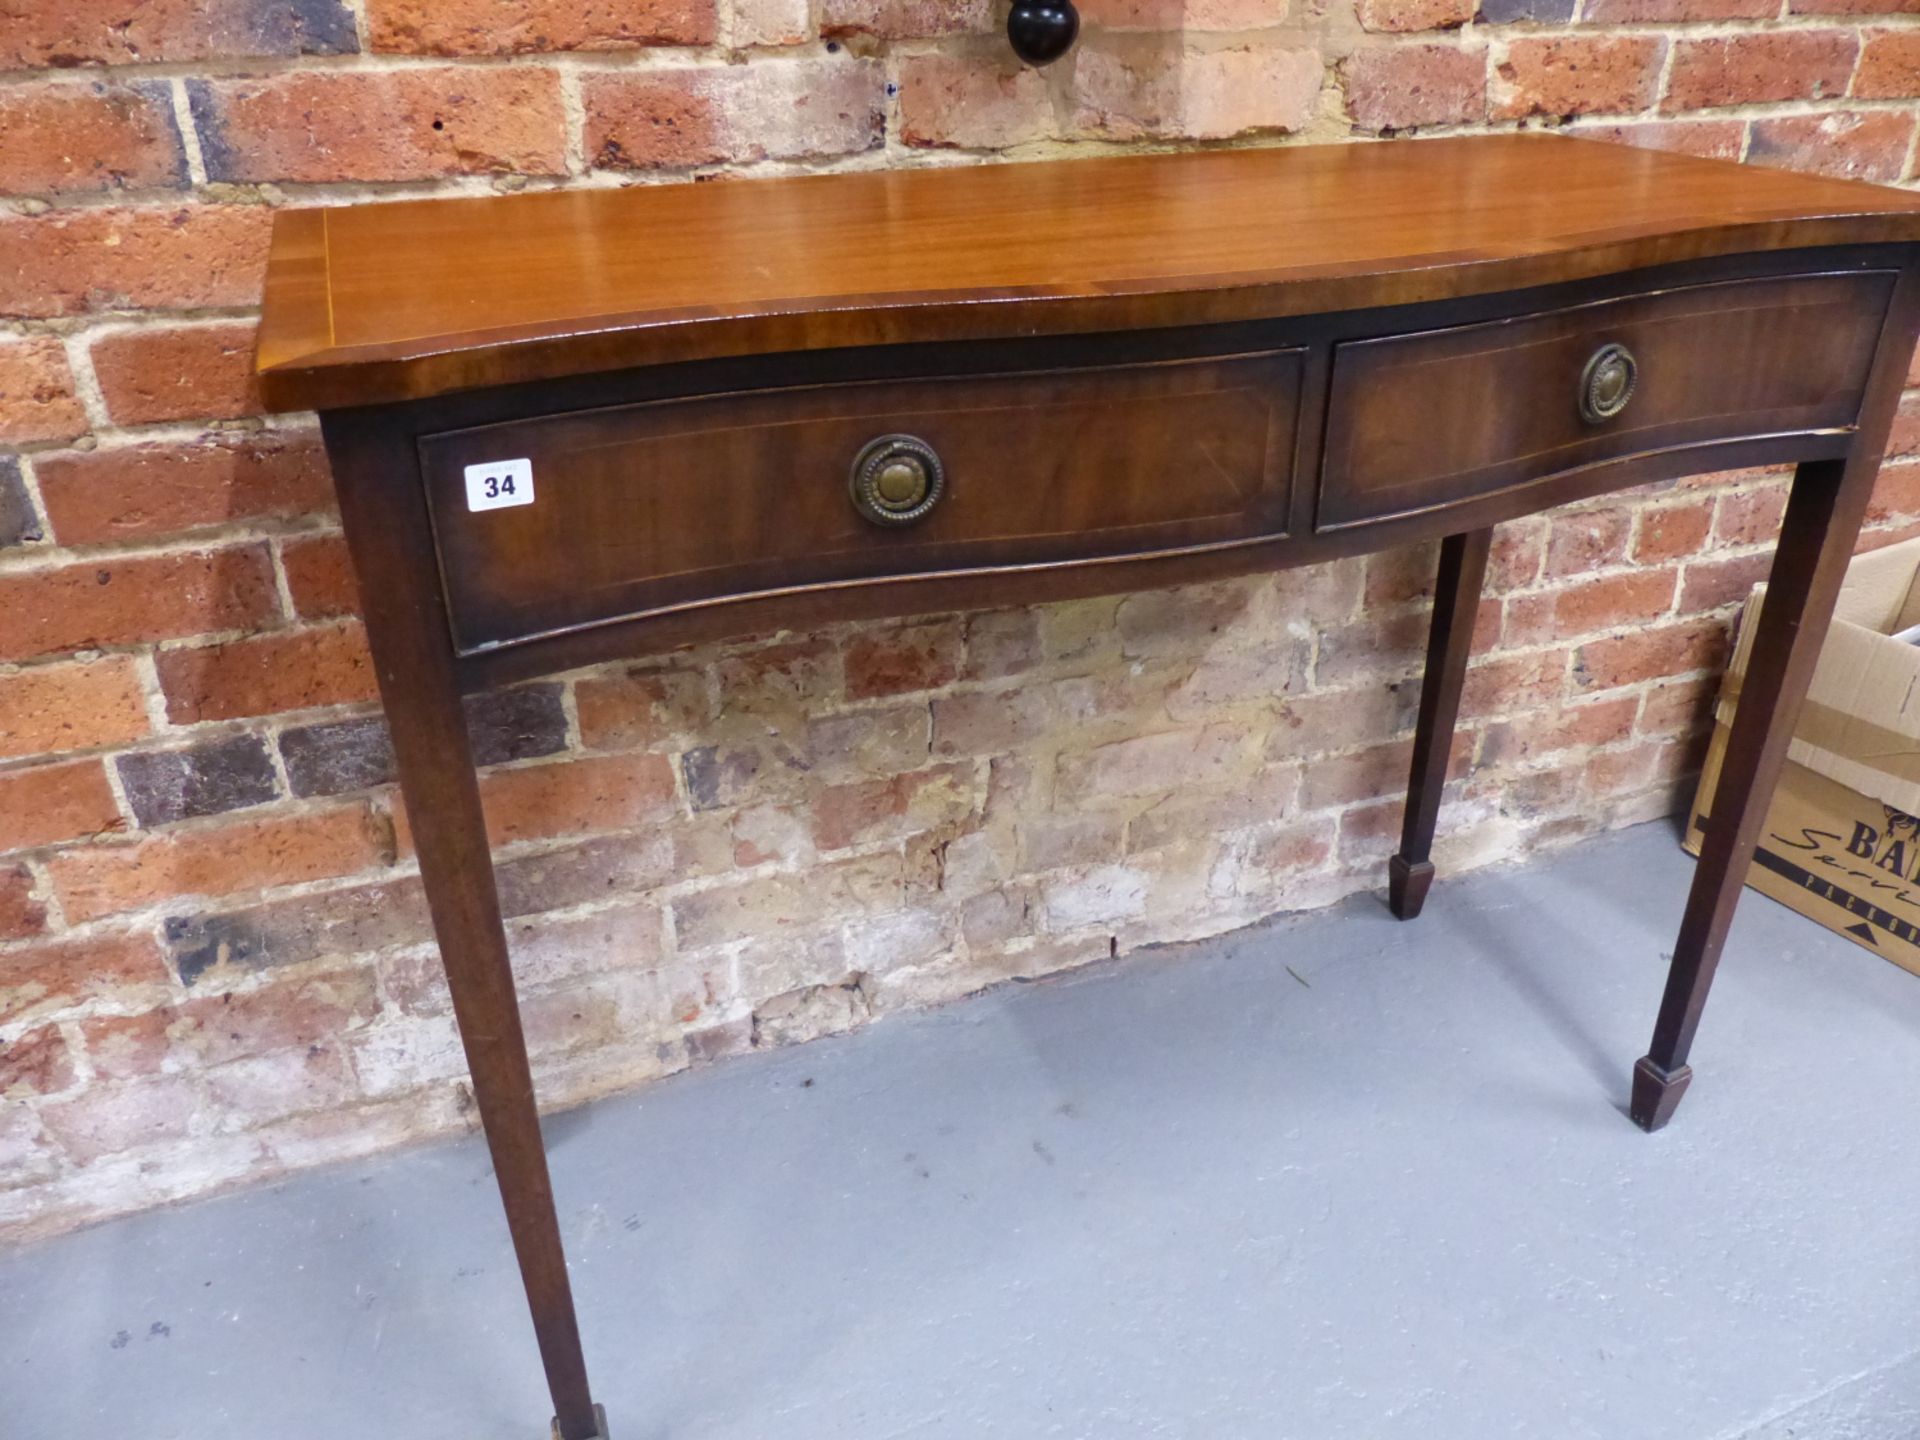 G.T RACKSTRAW , A GEORGE III STYLE MAHOGANY SERPENTINE FRONT SERVING SIDE TABLE WITH TWO DRAWERS. - Image 3 of 4